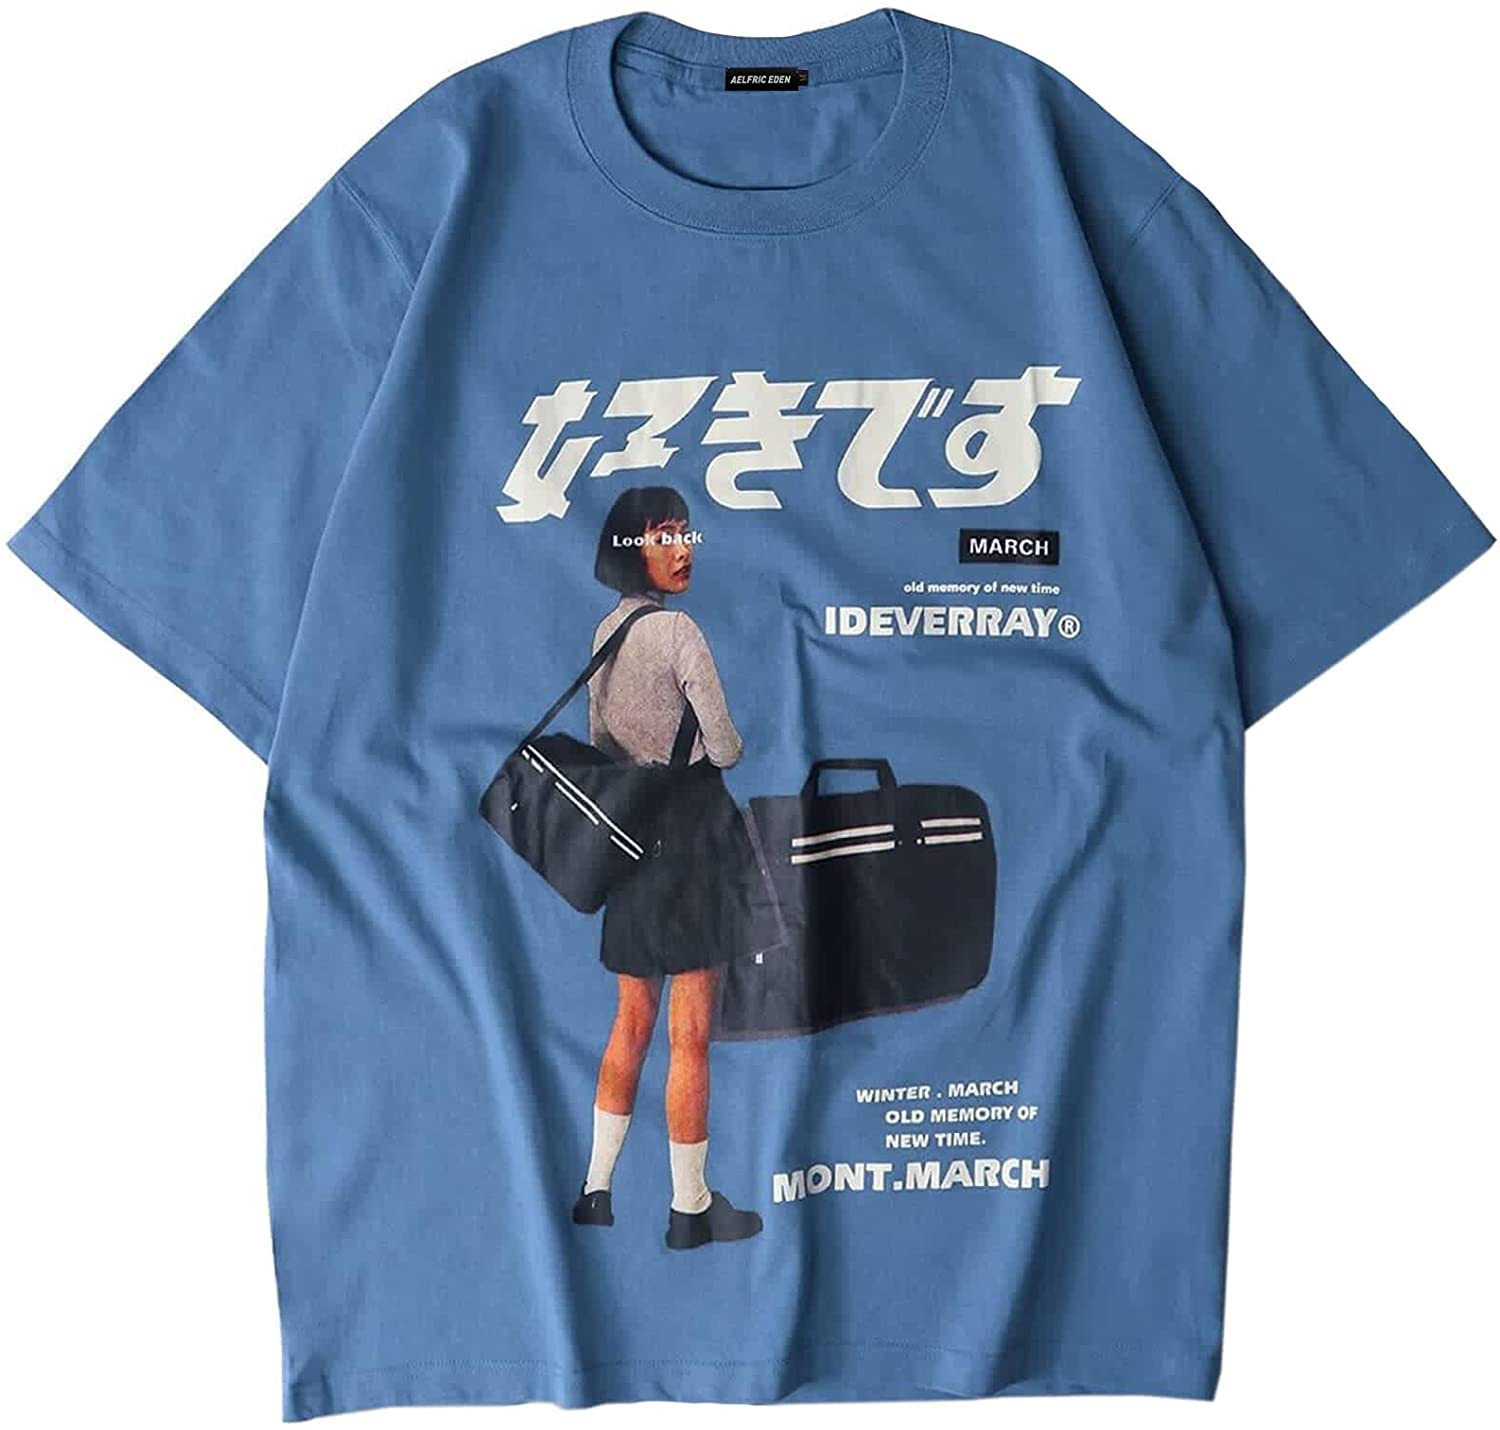 Aelfric Eden Oversized T Shirt Men 90s Shirt Unisex Streetwear Contrast  Color Graphic Tees Casual Vintage Summer Tops 